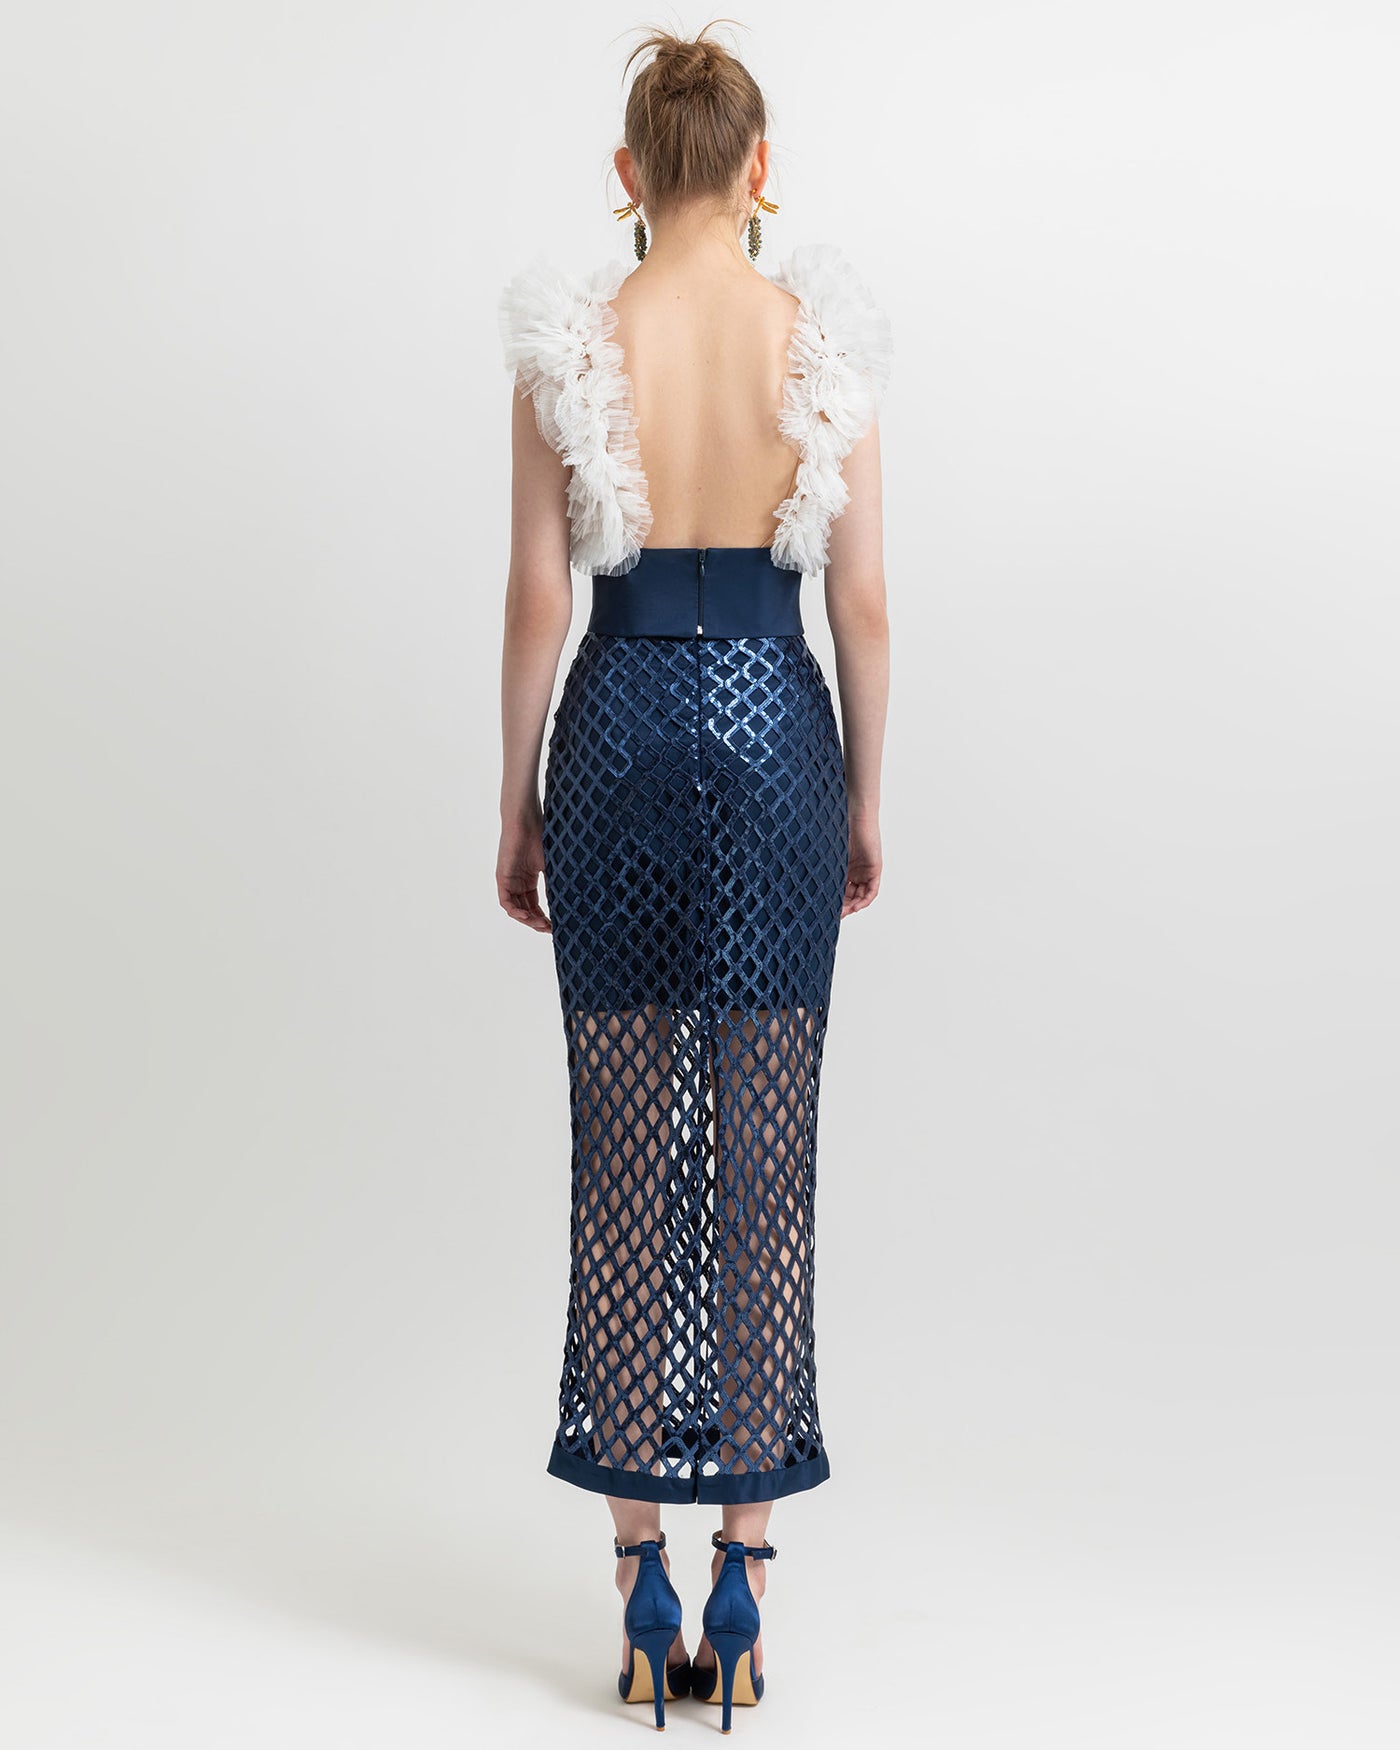 Backless Tulle Top and Midi Skirt